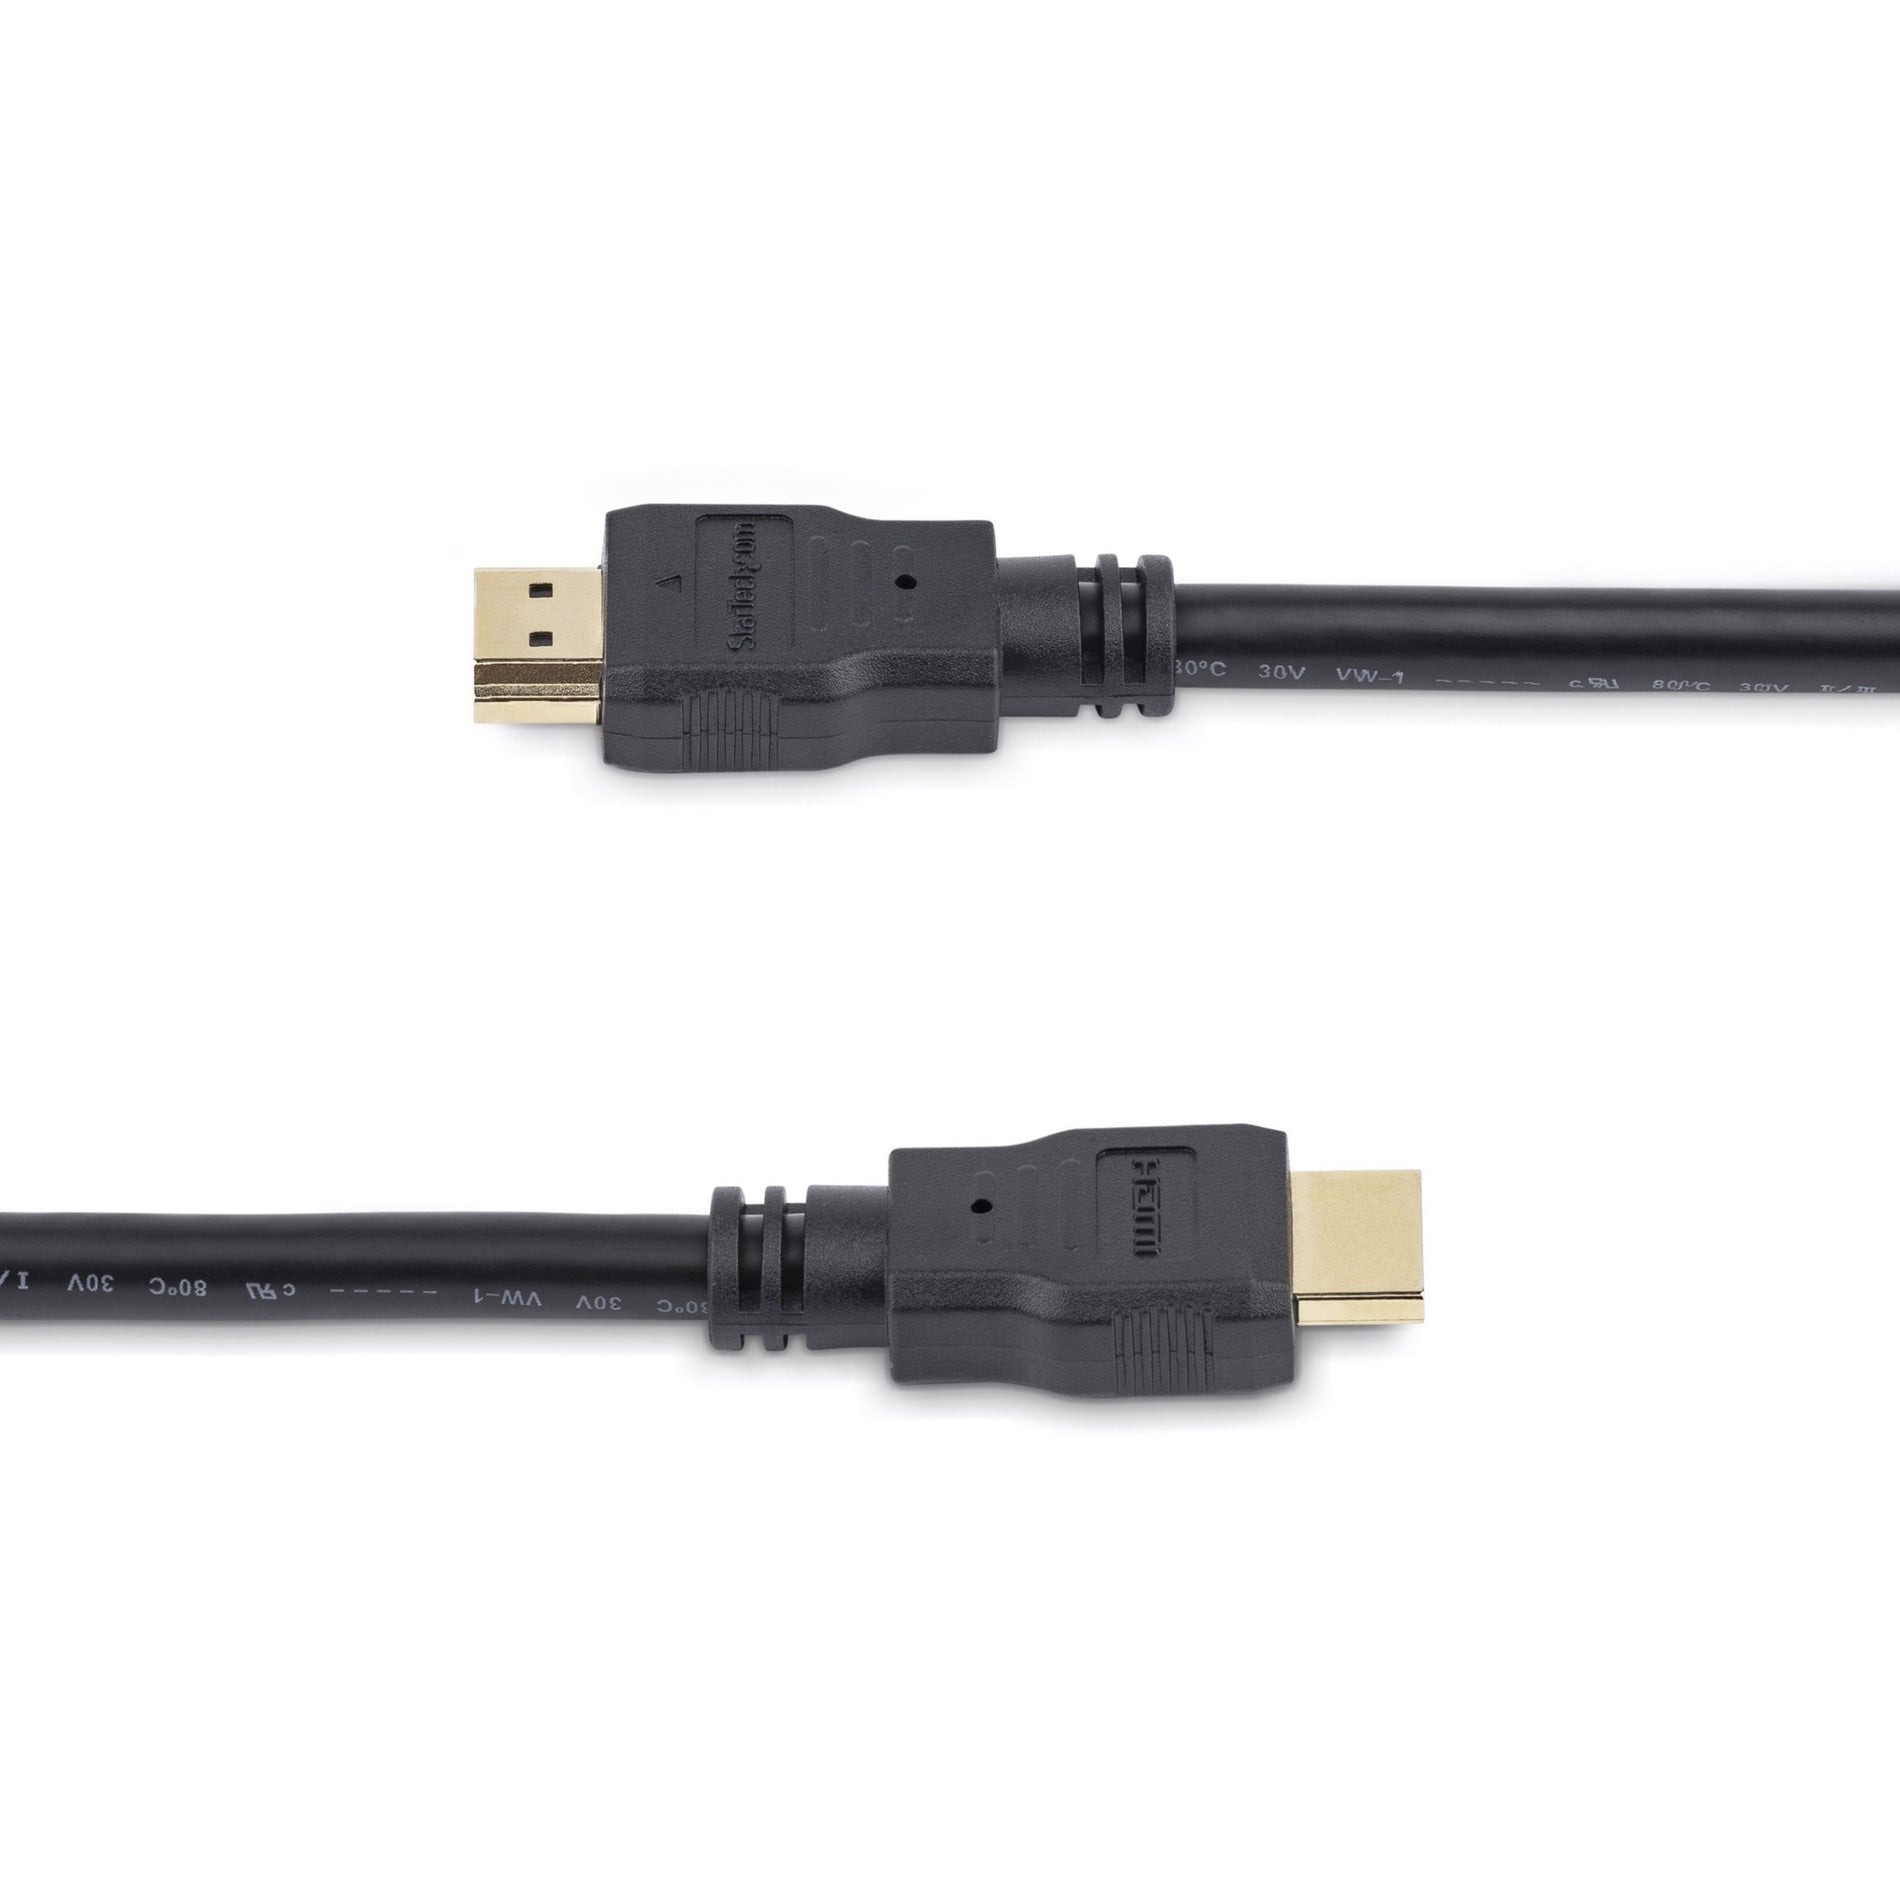 StarTech.com HDMM150CM 1.5m High Speed HDMI Cable - Ultra HD 4k x 2k HDMI Cable, Corrosion-free, Gold Plated Connectors